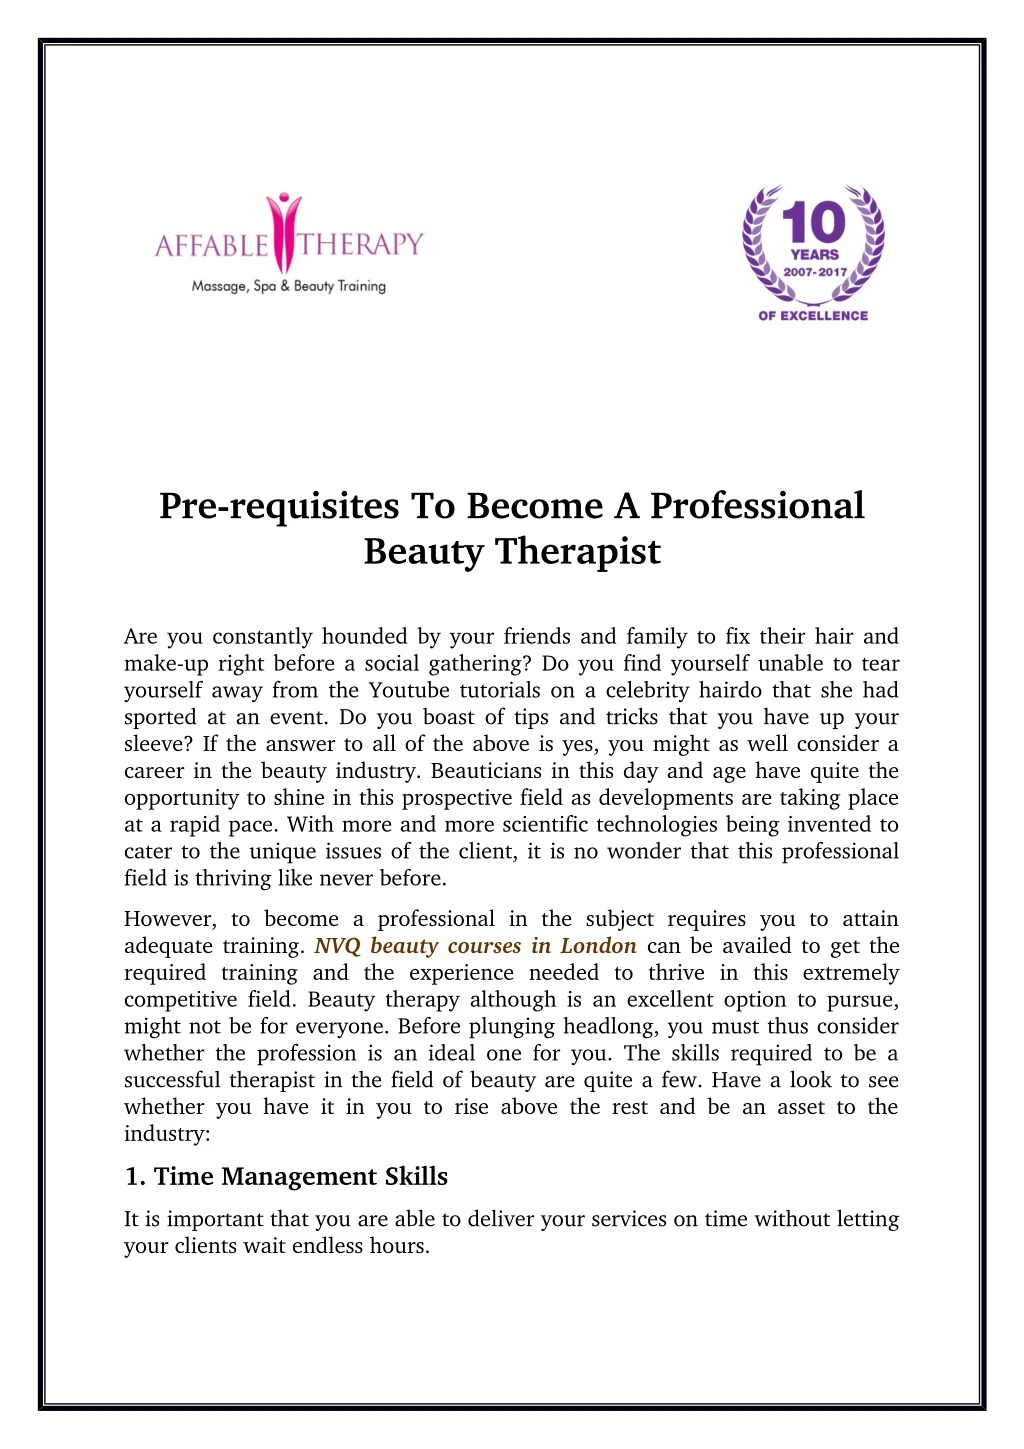 pre requisites to become a professional beauty